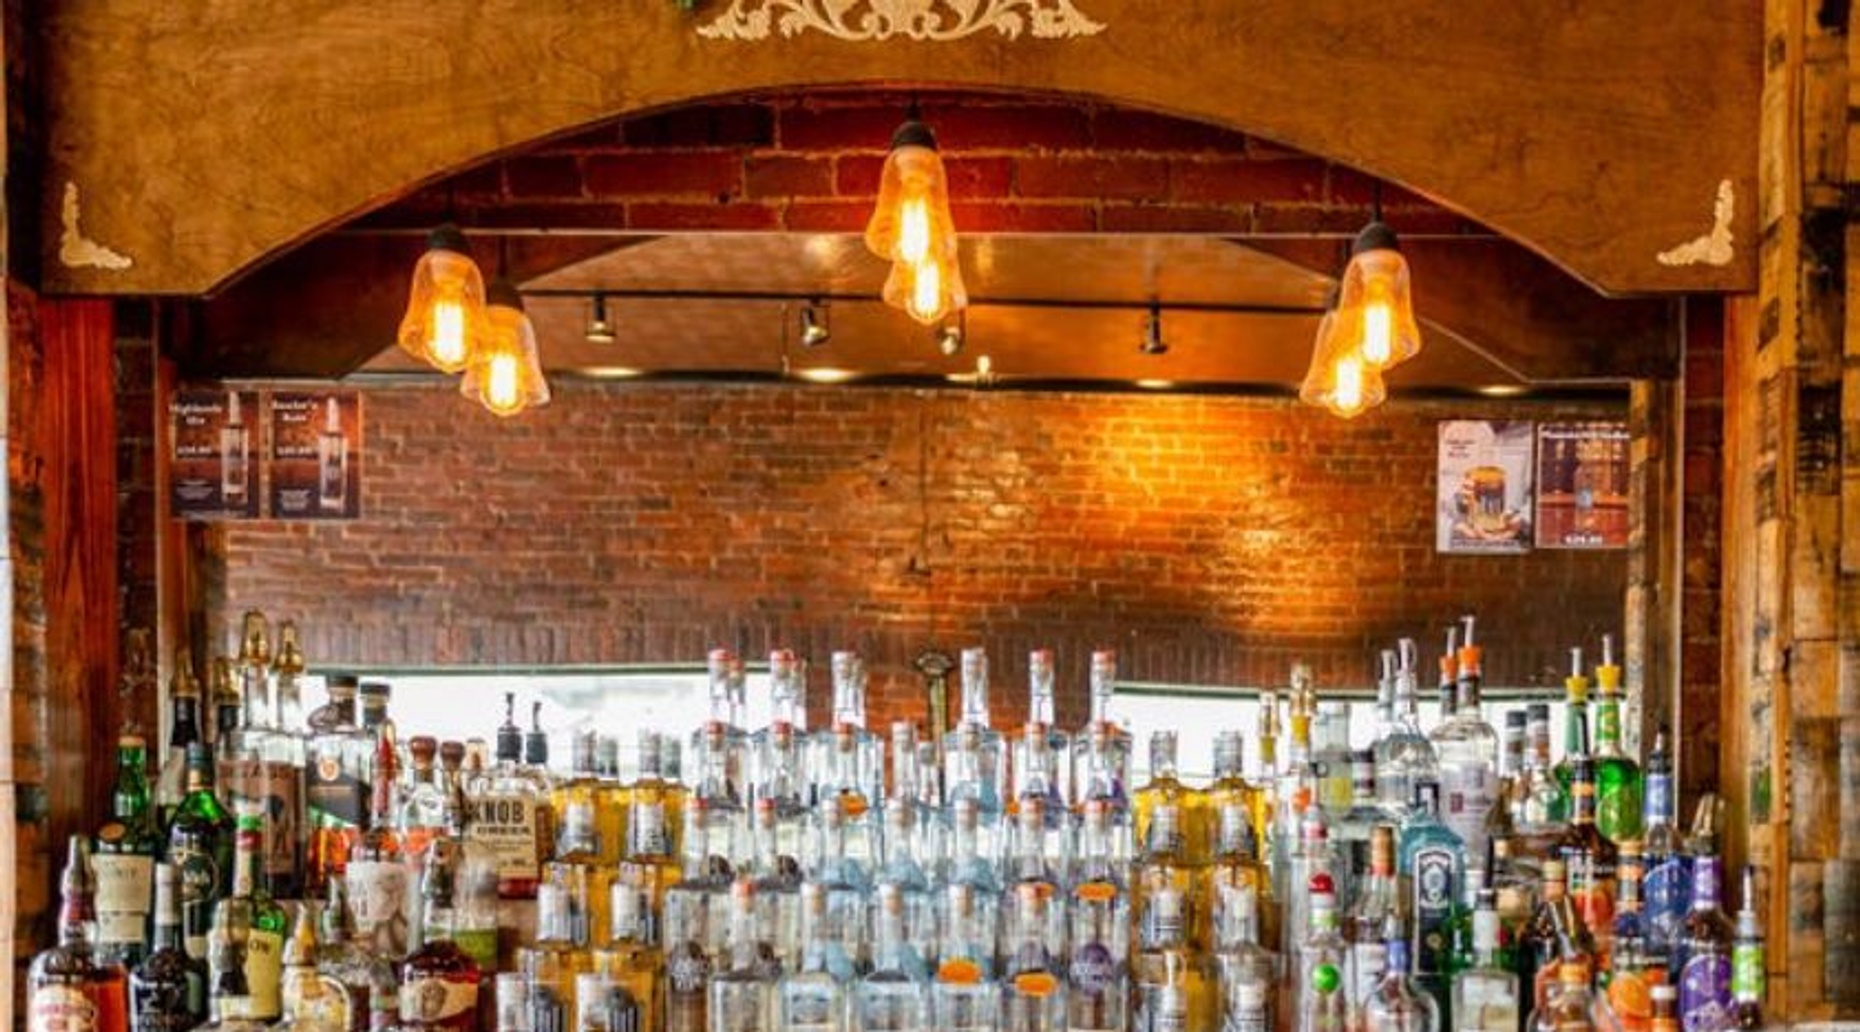 Prohibition Themed Distillery Tour & Tasting in Downtown Louisville